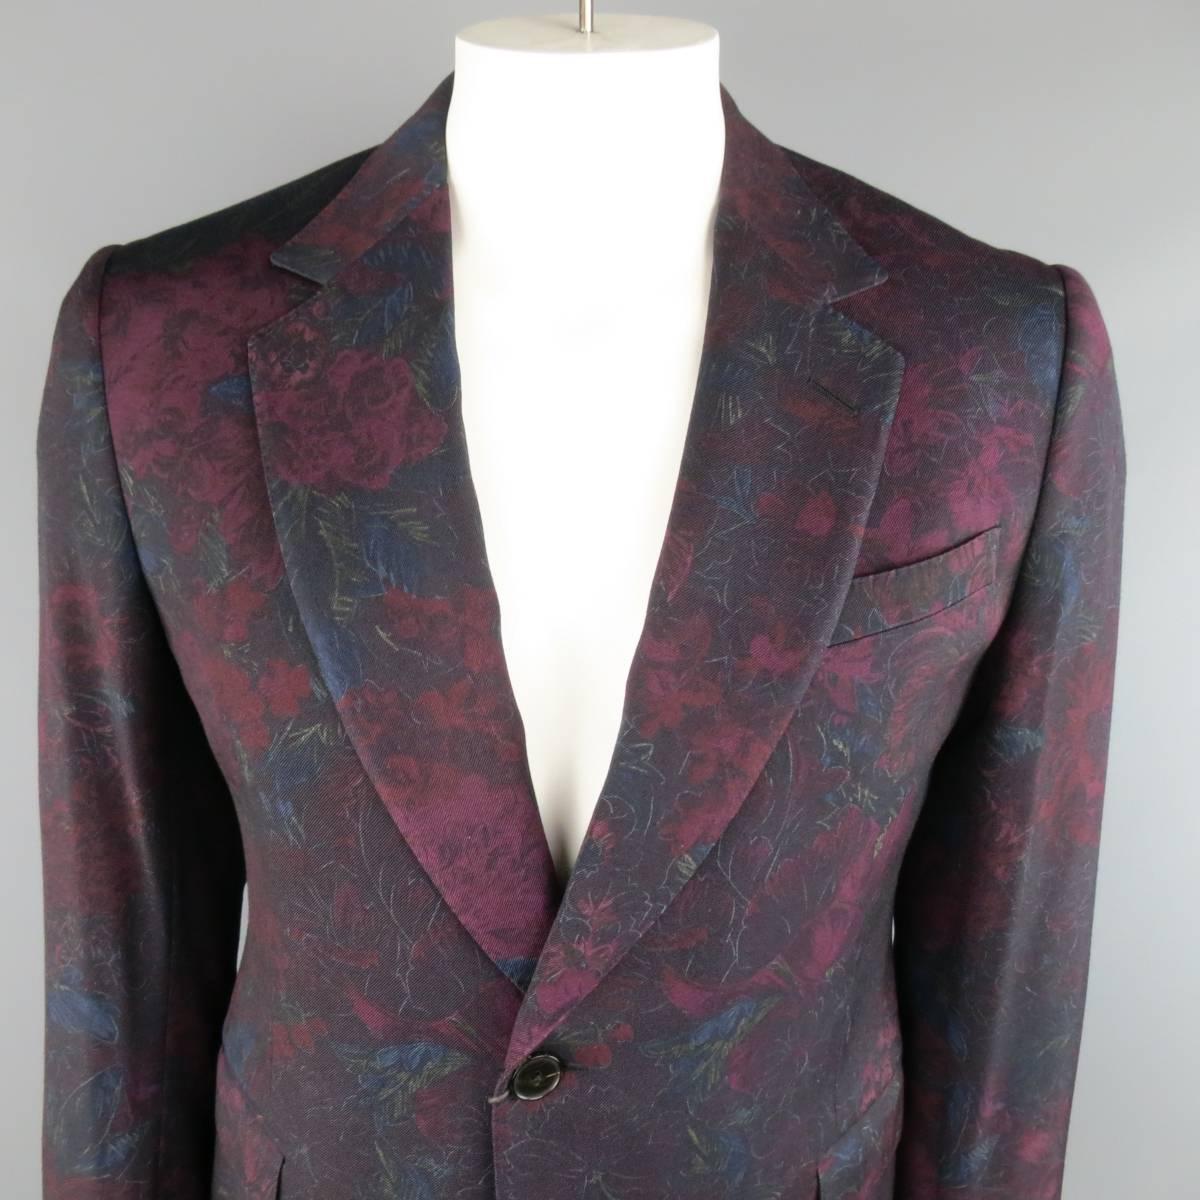 New GUCCI sport coat in a retro burgundy floral print wool twill featuring a wide notch lapel, two button closure, and double vented back. Made in Italy.
 
New with Tags. Retails at $3390.00.
Marked: IT 52
 
Measurements:
 
Shoulder: 18 in.
Chest: